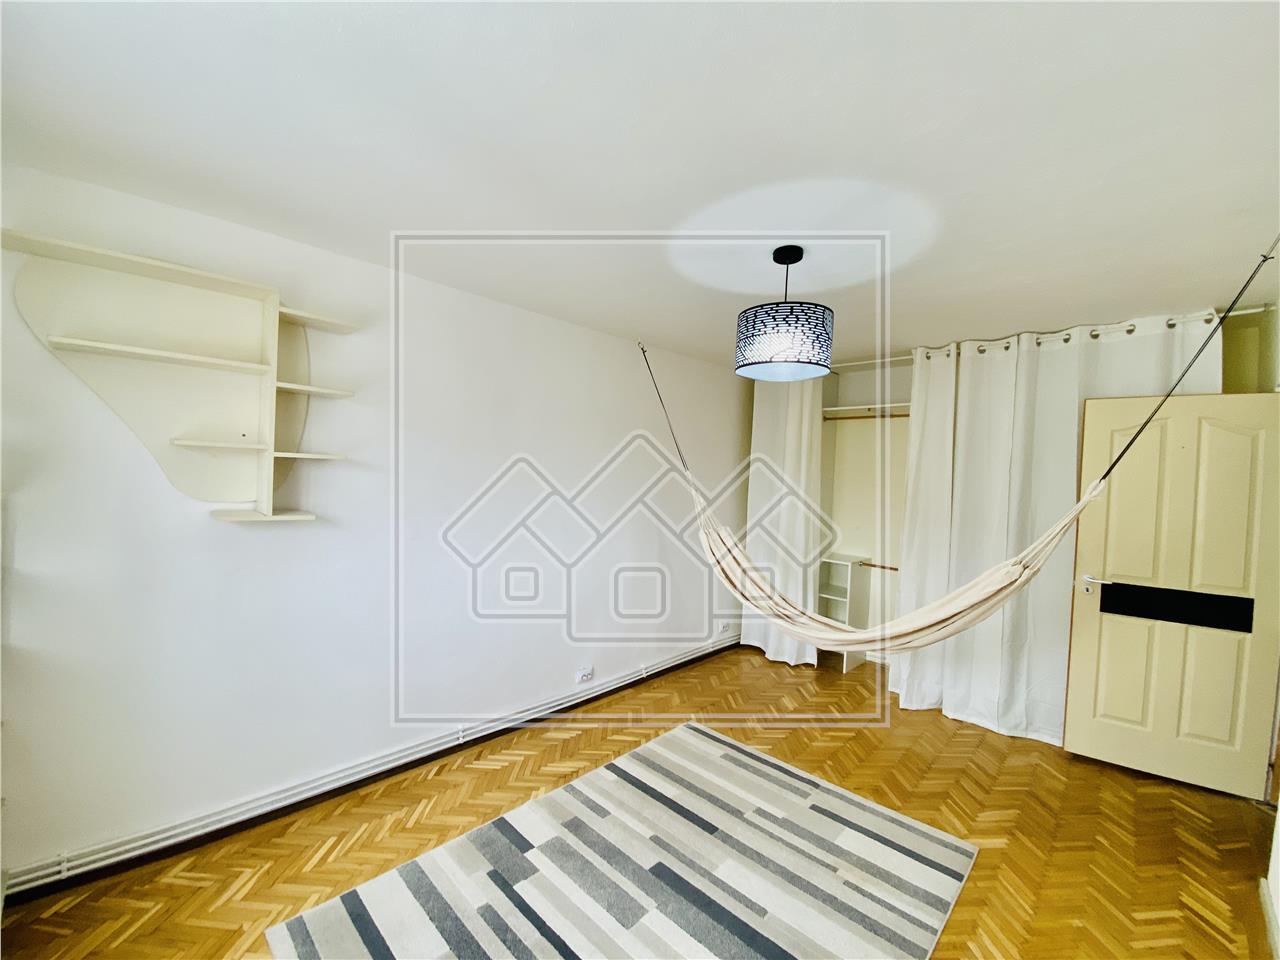 Apartment for rent in Sibiu - 3 rooms and balcony - Valea Aurie